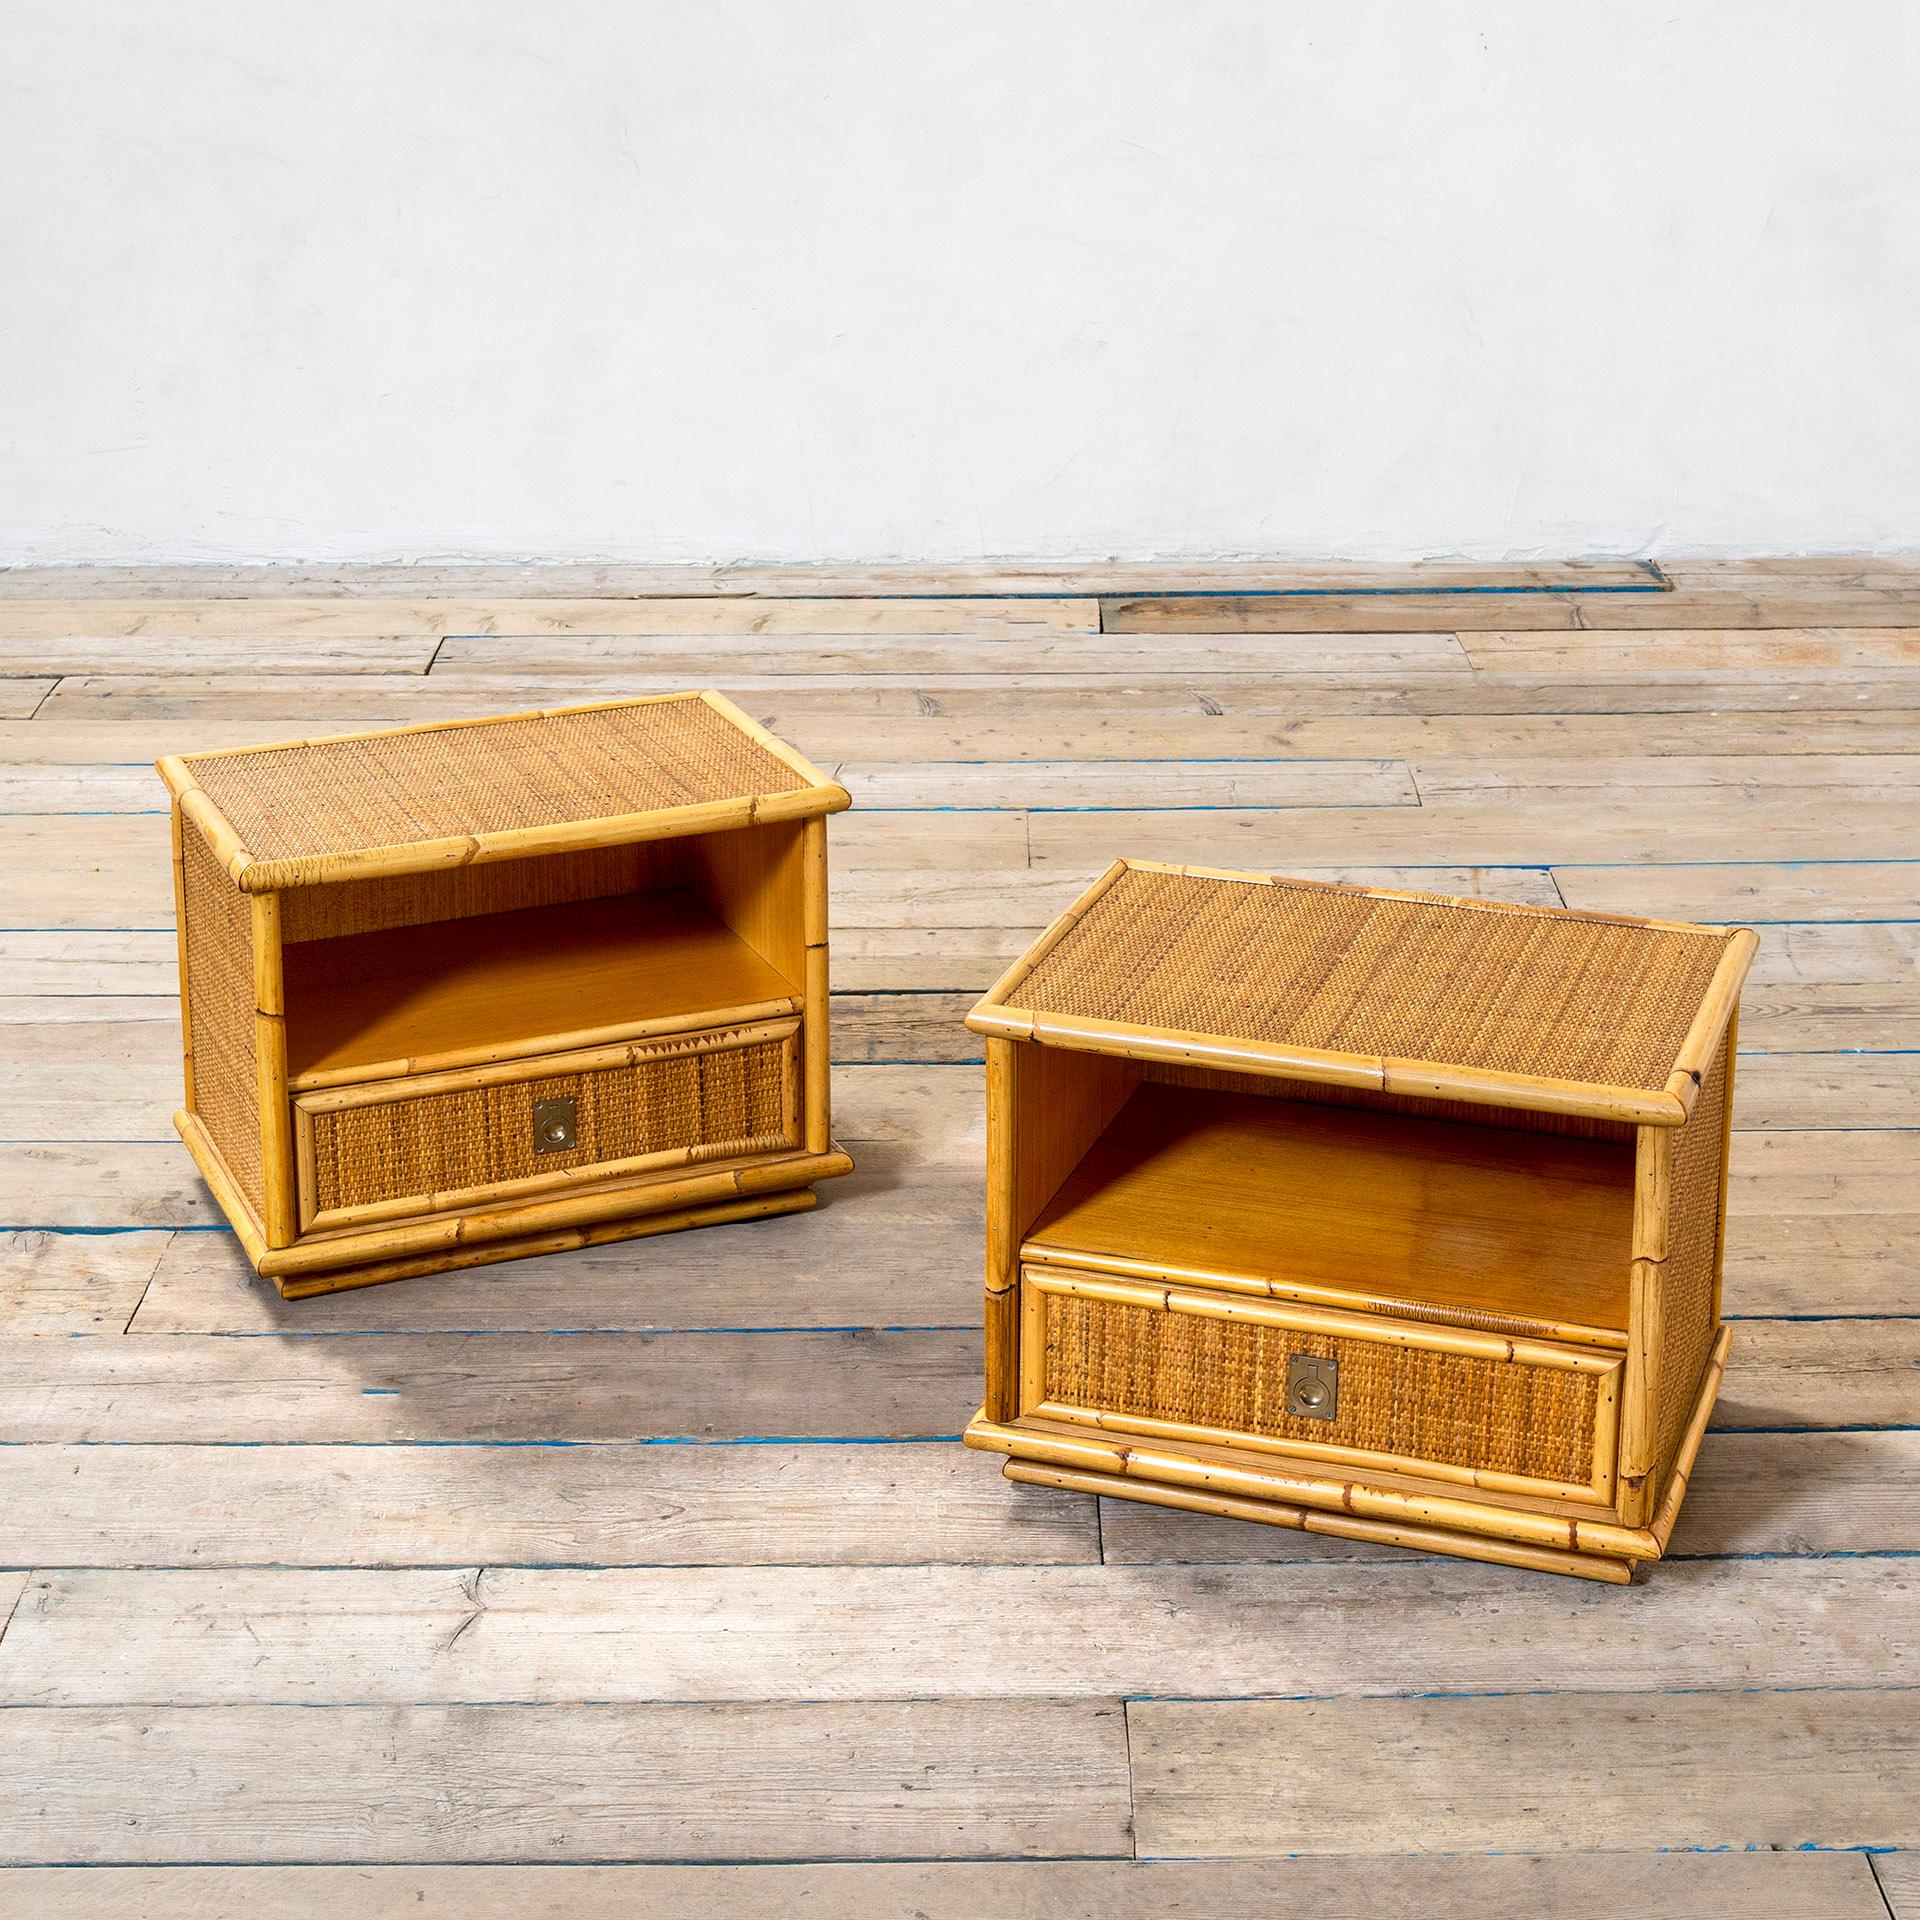 Pair of Night stands in wicker and bamboo by Vivai del Sud and designed in '60s. 
This pair of night stands are ideal for the vacation house, where also in the bedroom you like the idea to breathe the 